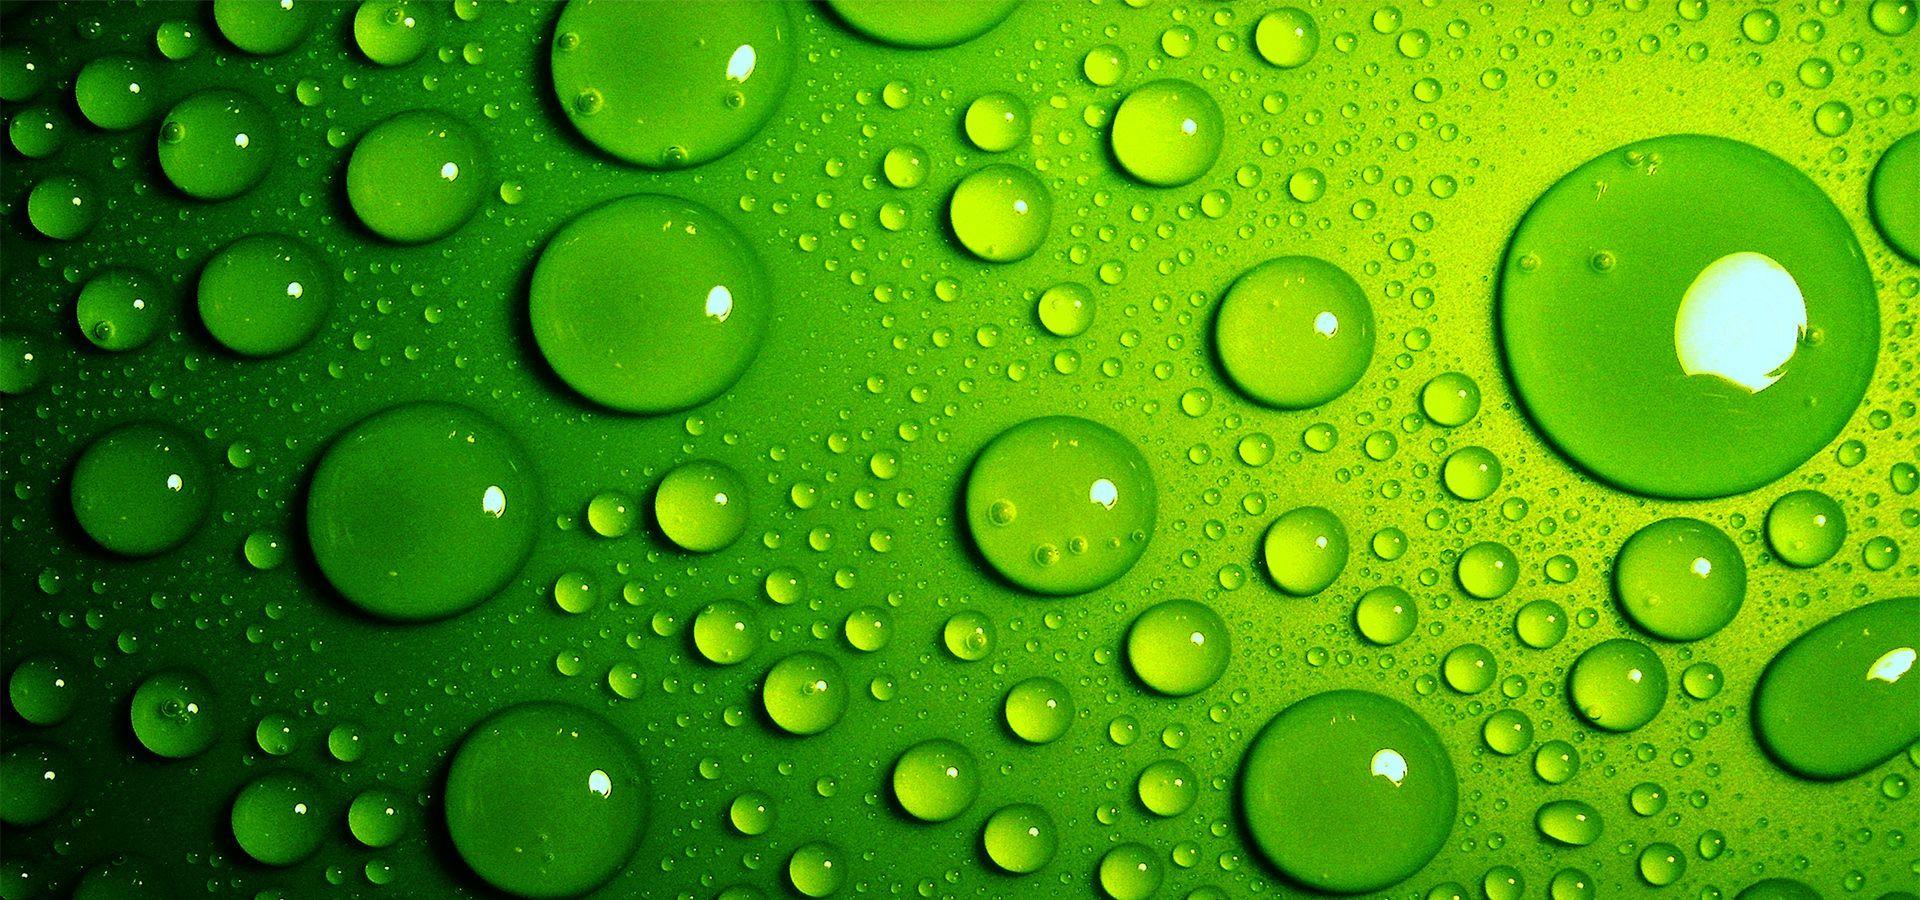 Green Water Photos Download The BEST Free Green Water Stock Photos  HD  Images